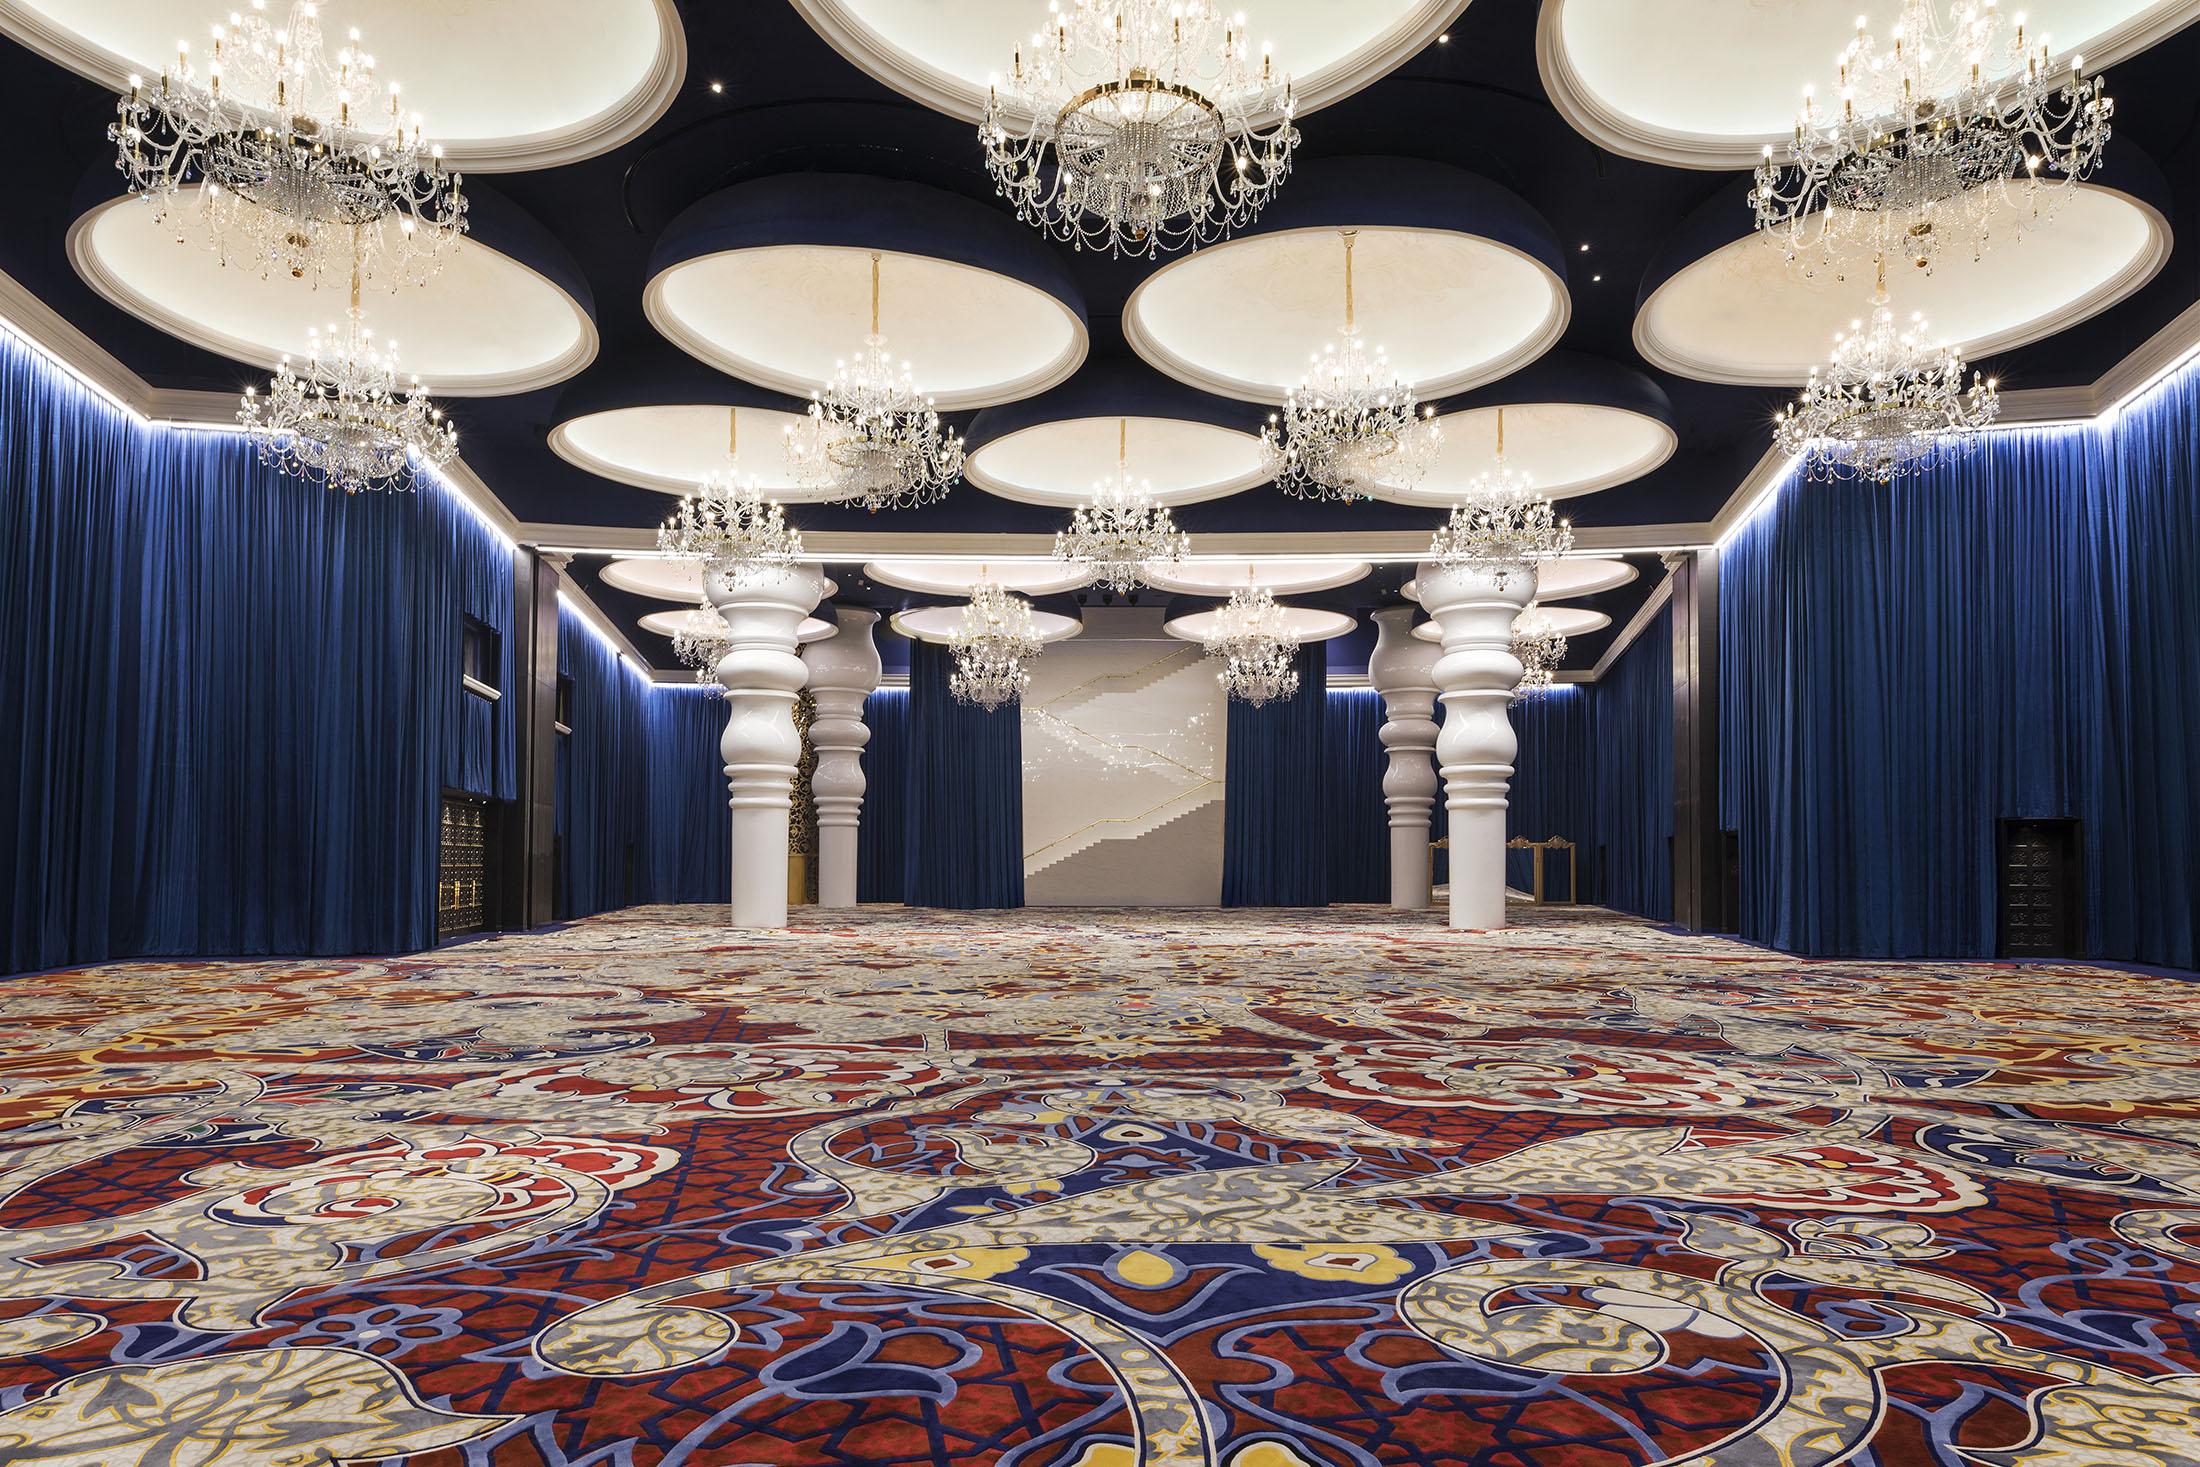 Grand ballroom with chandeliers above an ornate carpet